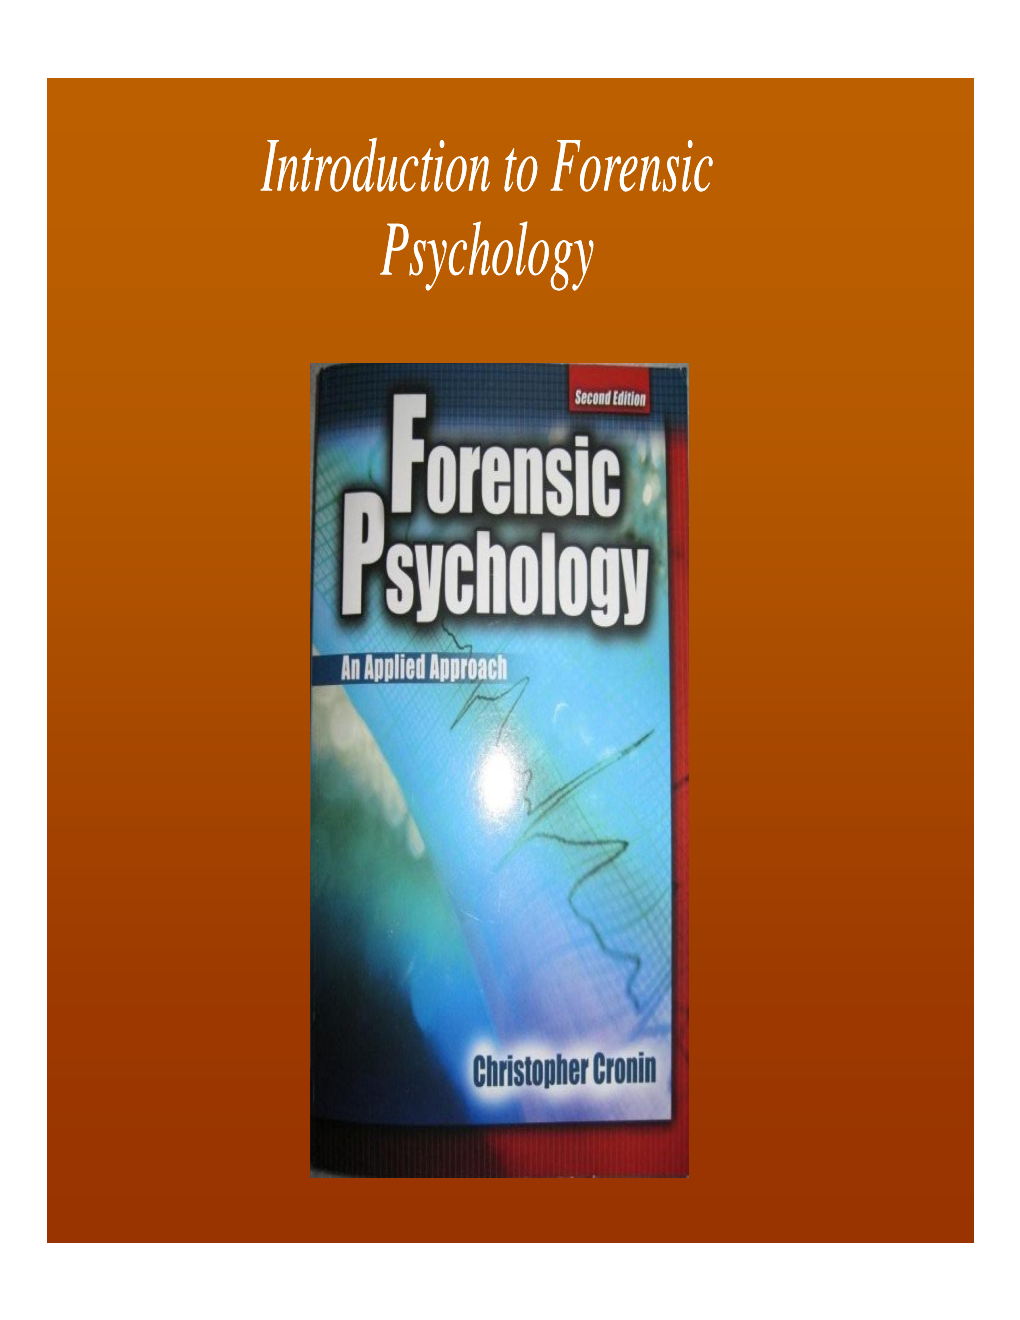 Introduction to Forensic Psychology Definition of Forensic Psychology